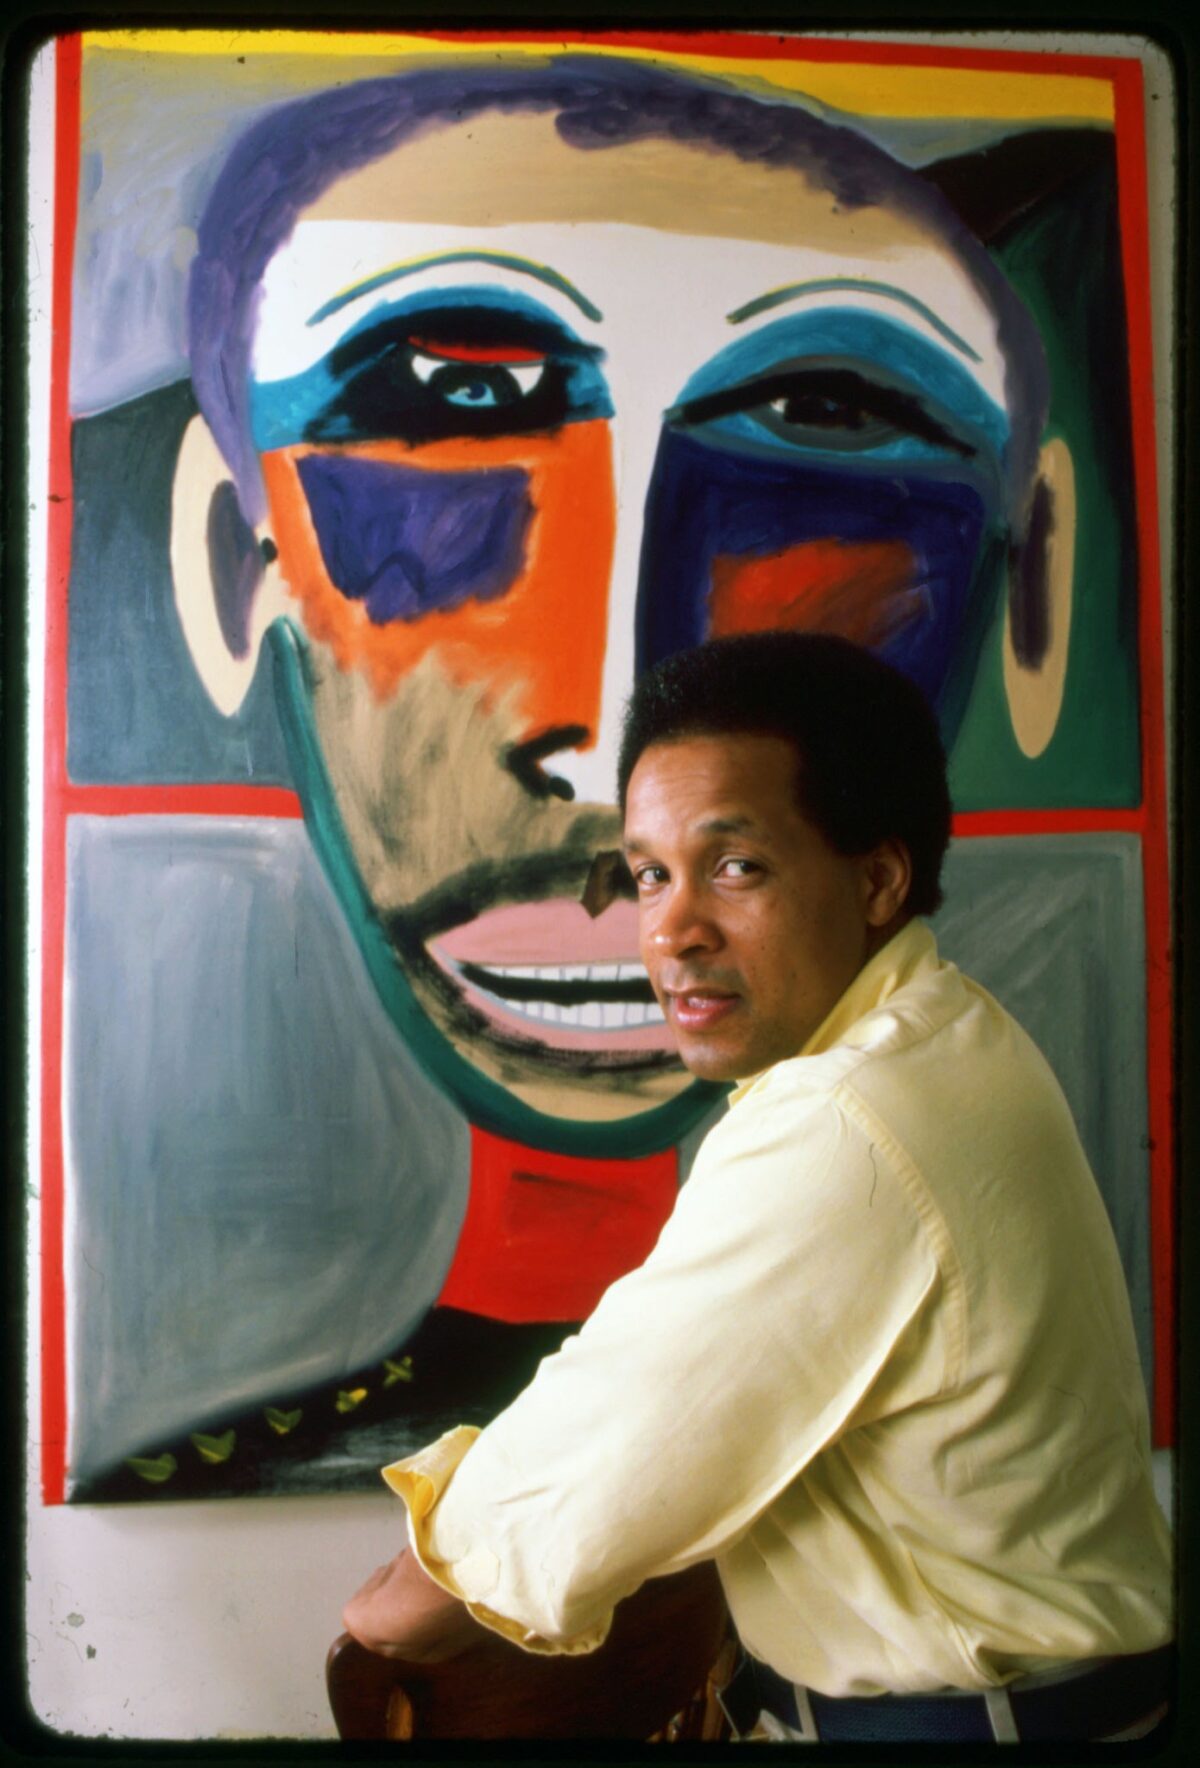 Portrait of American artist Frederick J Brown (1945 - 2012) as he poses in front of one of his paintings, New York, 1984. (Photo by Anthony Barboza/Getty Images)